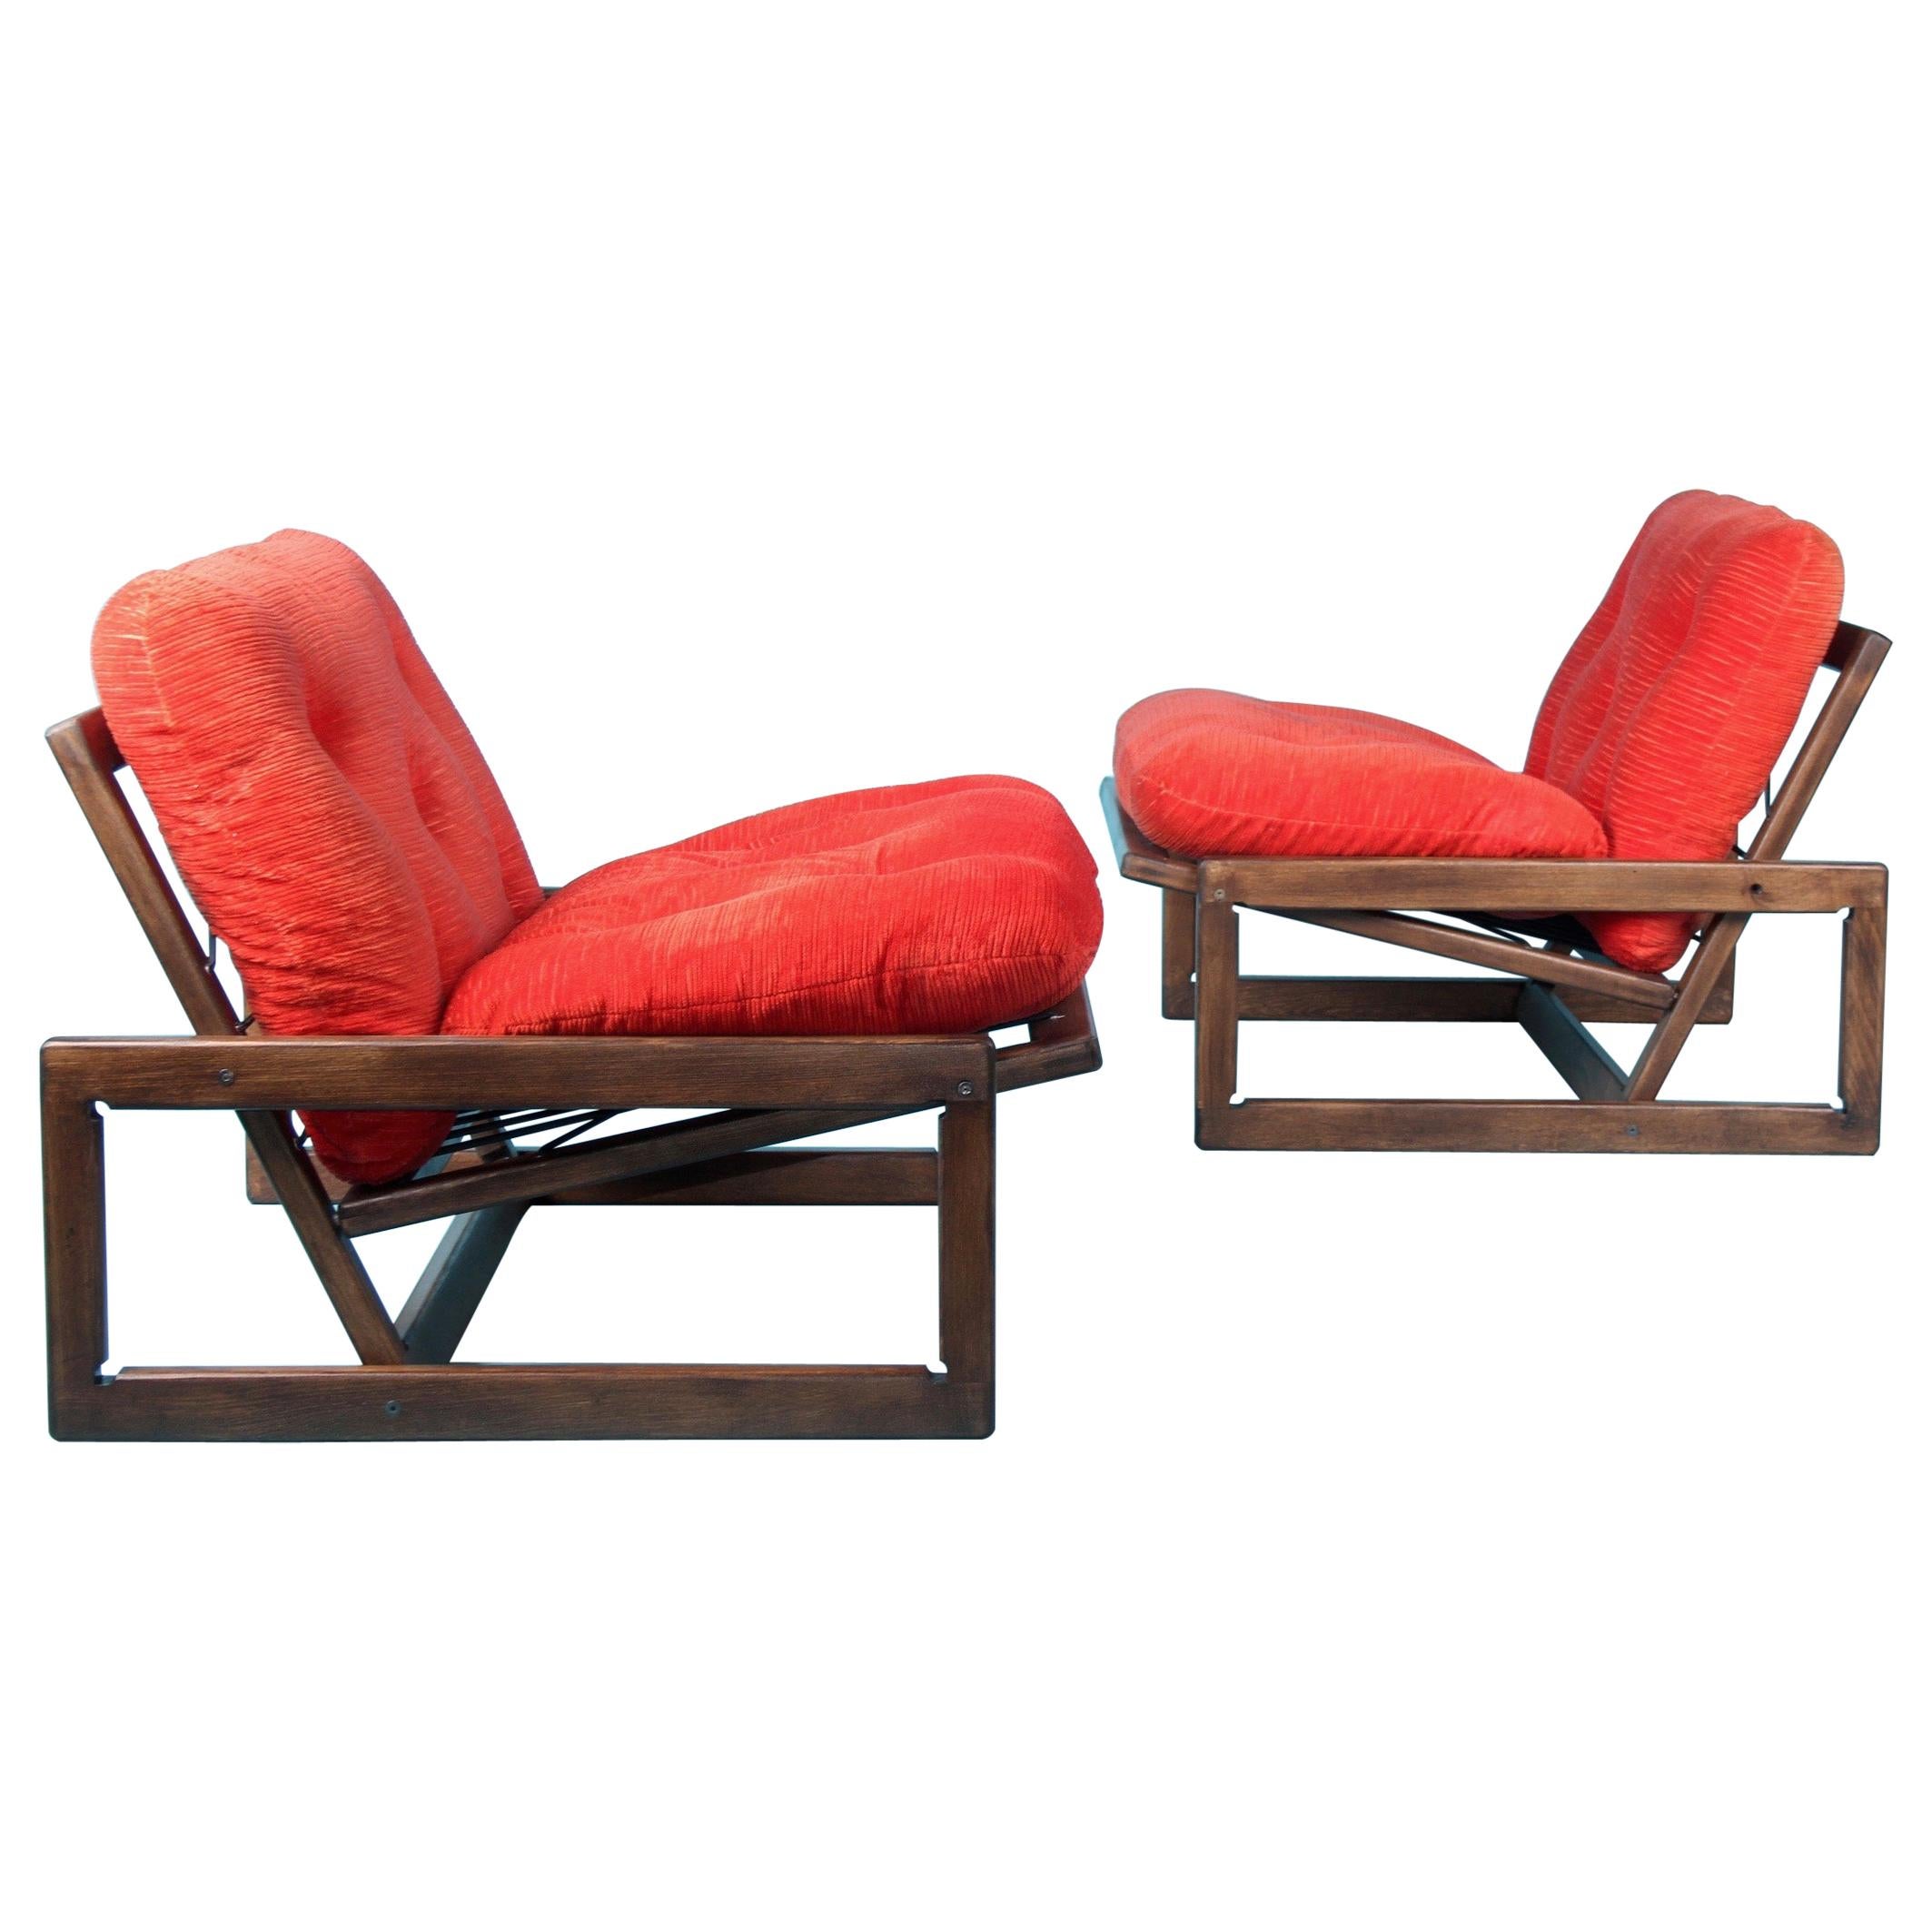 Set of 4 'Carlotta' Lounge Chairs by Afra & Tobia Scarpa for Cassina